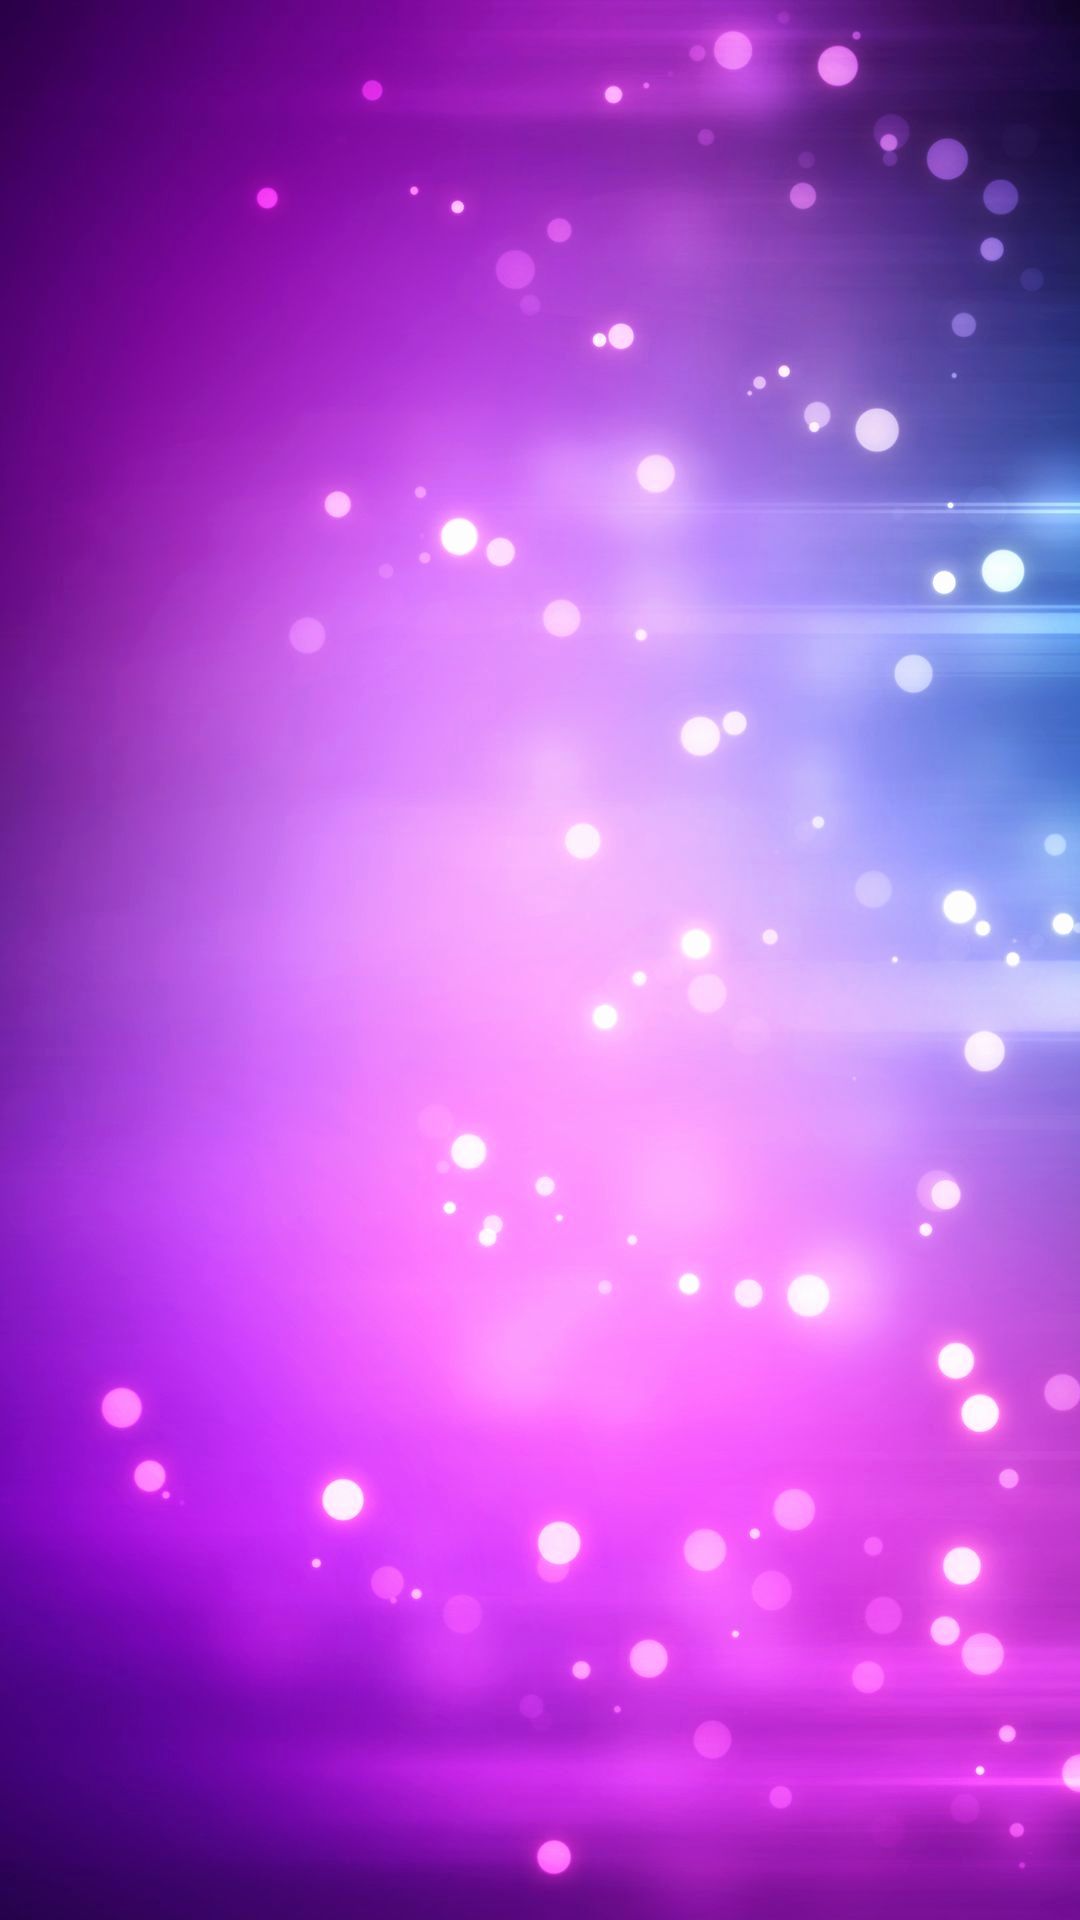 Purple Phone Wallpaper Beautiful Beautiful Pink Purple Blue Abstract HD Mobile Wallpaper This Month of The Hudson